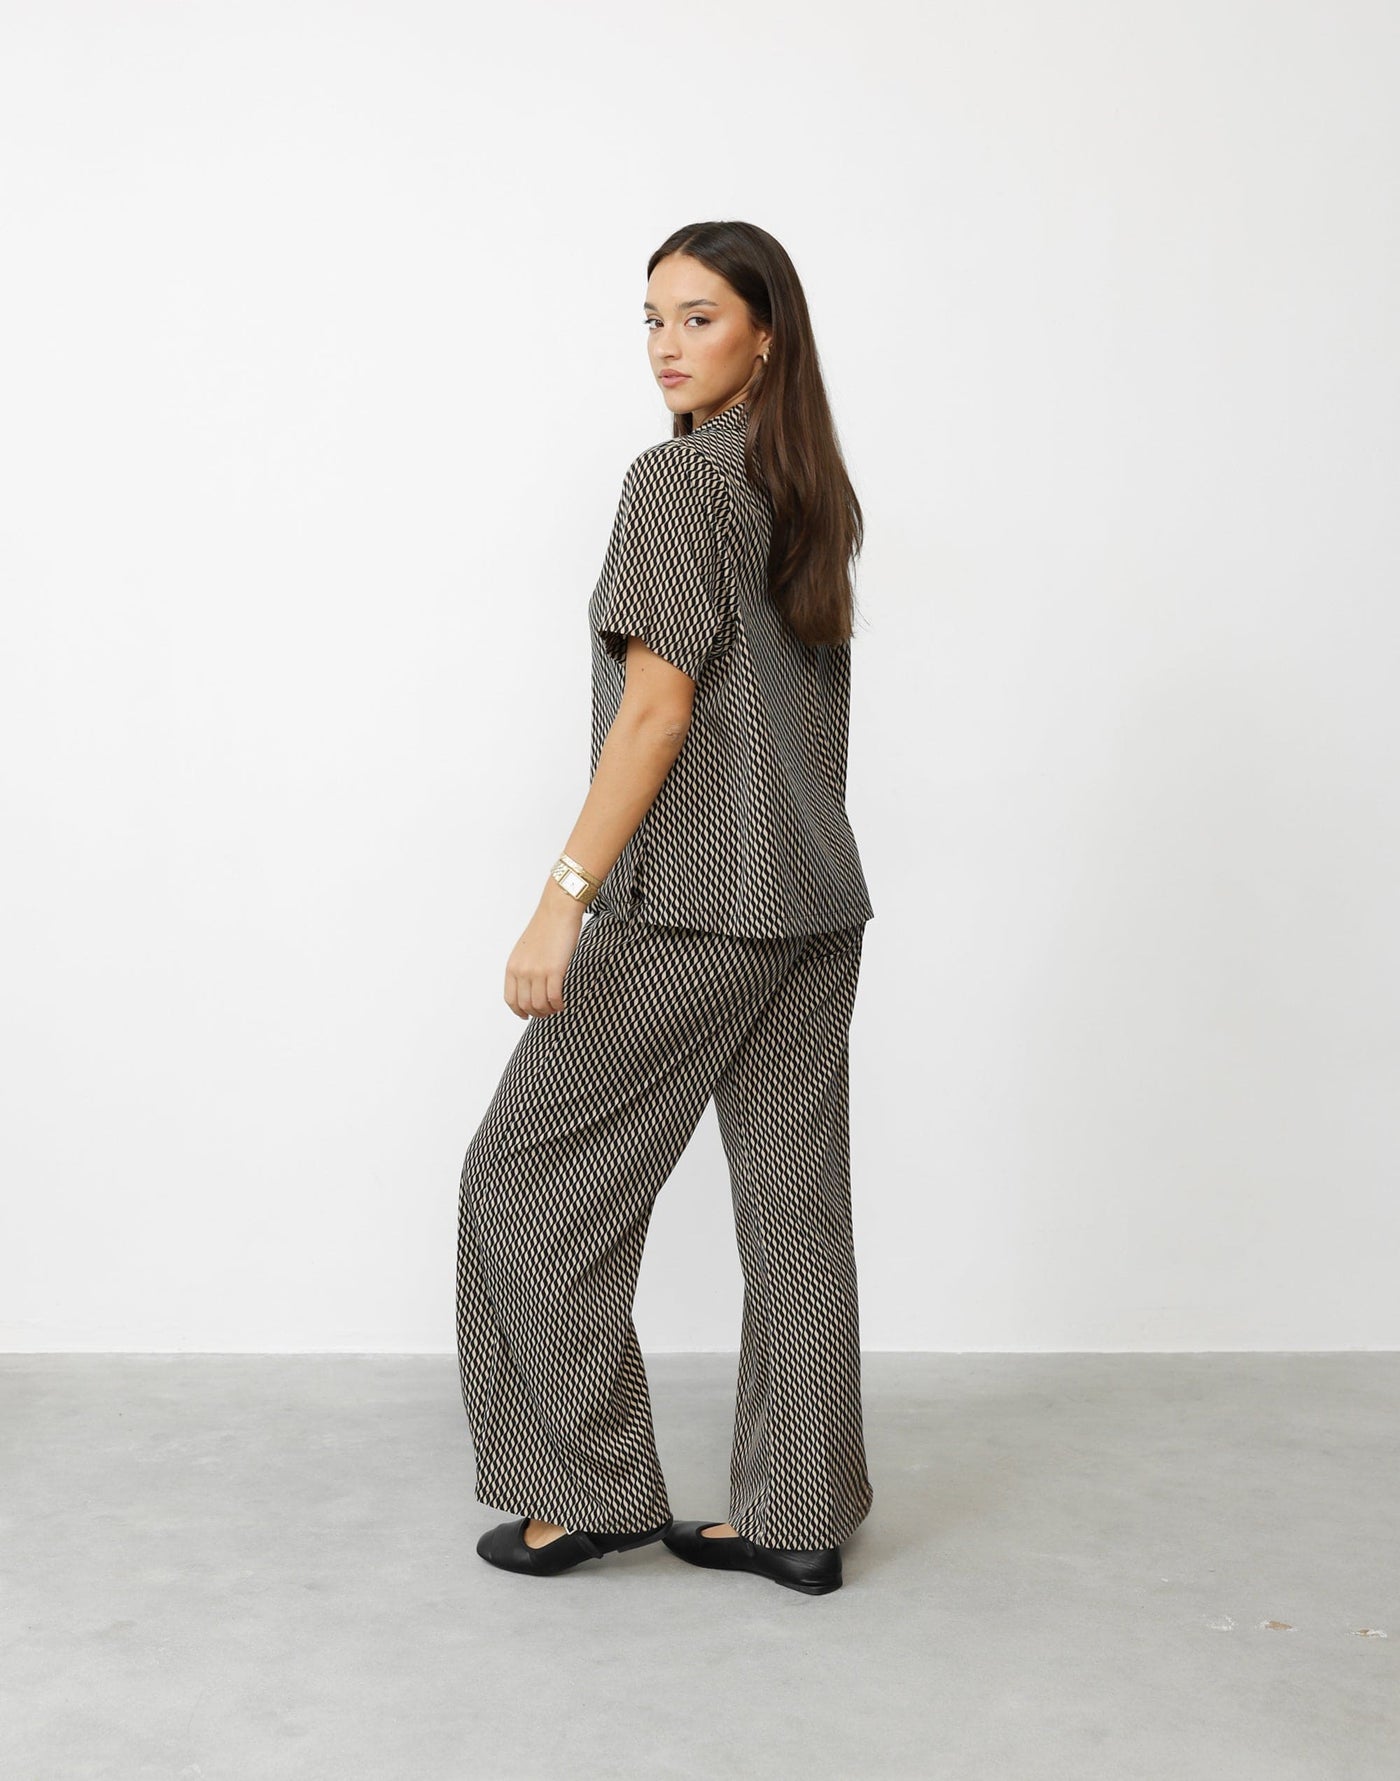 Zaya Shirt (Sand Ripple) | CHARCOAL Exclusive - Short Sleeved Patterned Button Closure Shirt - Women's Top - Charcoal Clothing